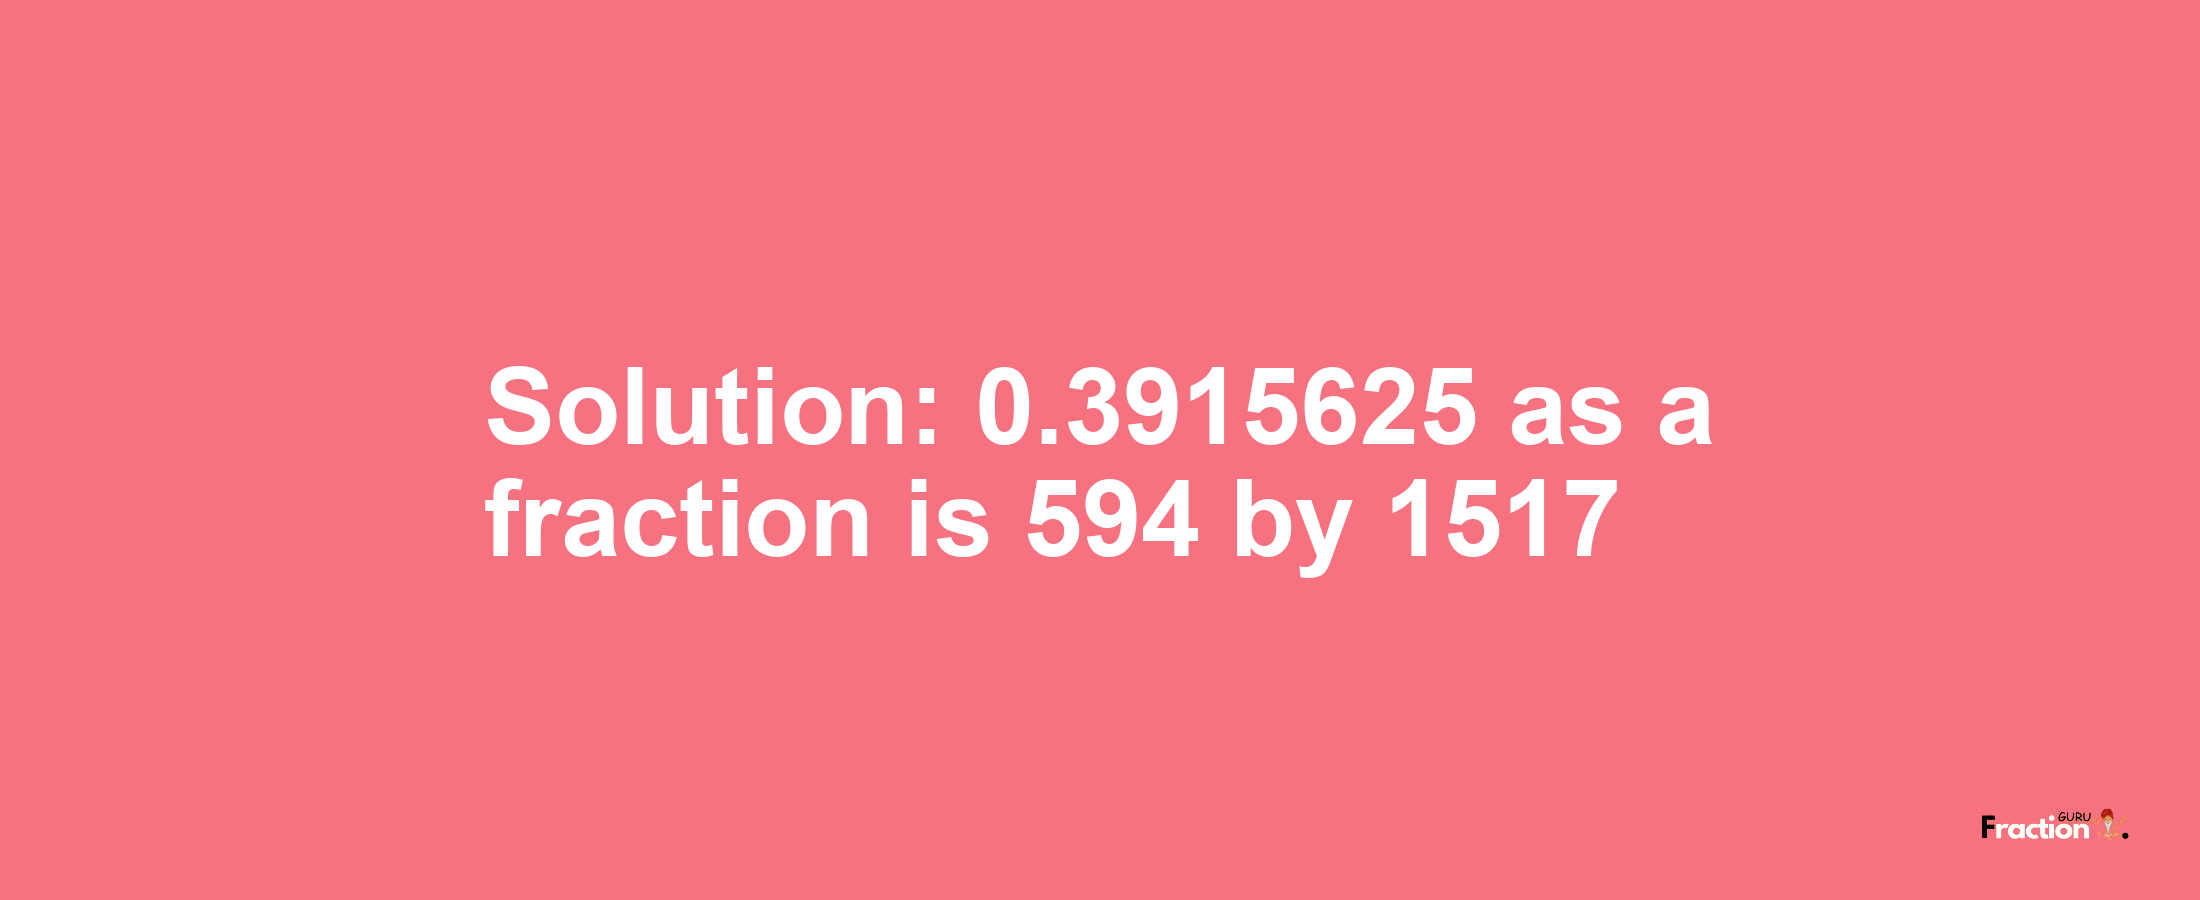 Solution:0.3915625 as a fraction is 594/1517